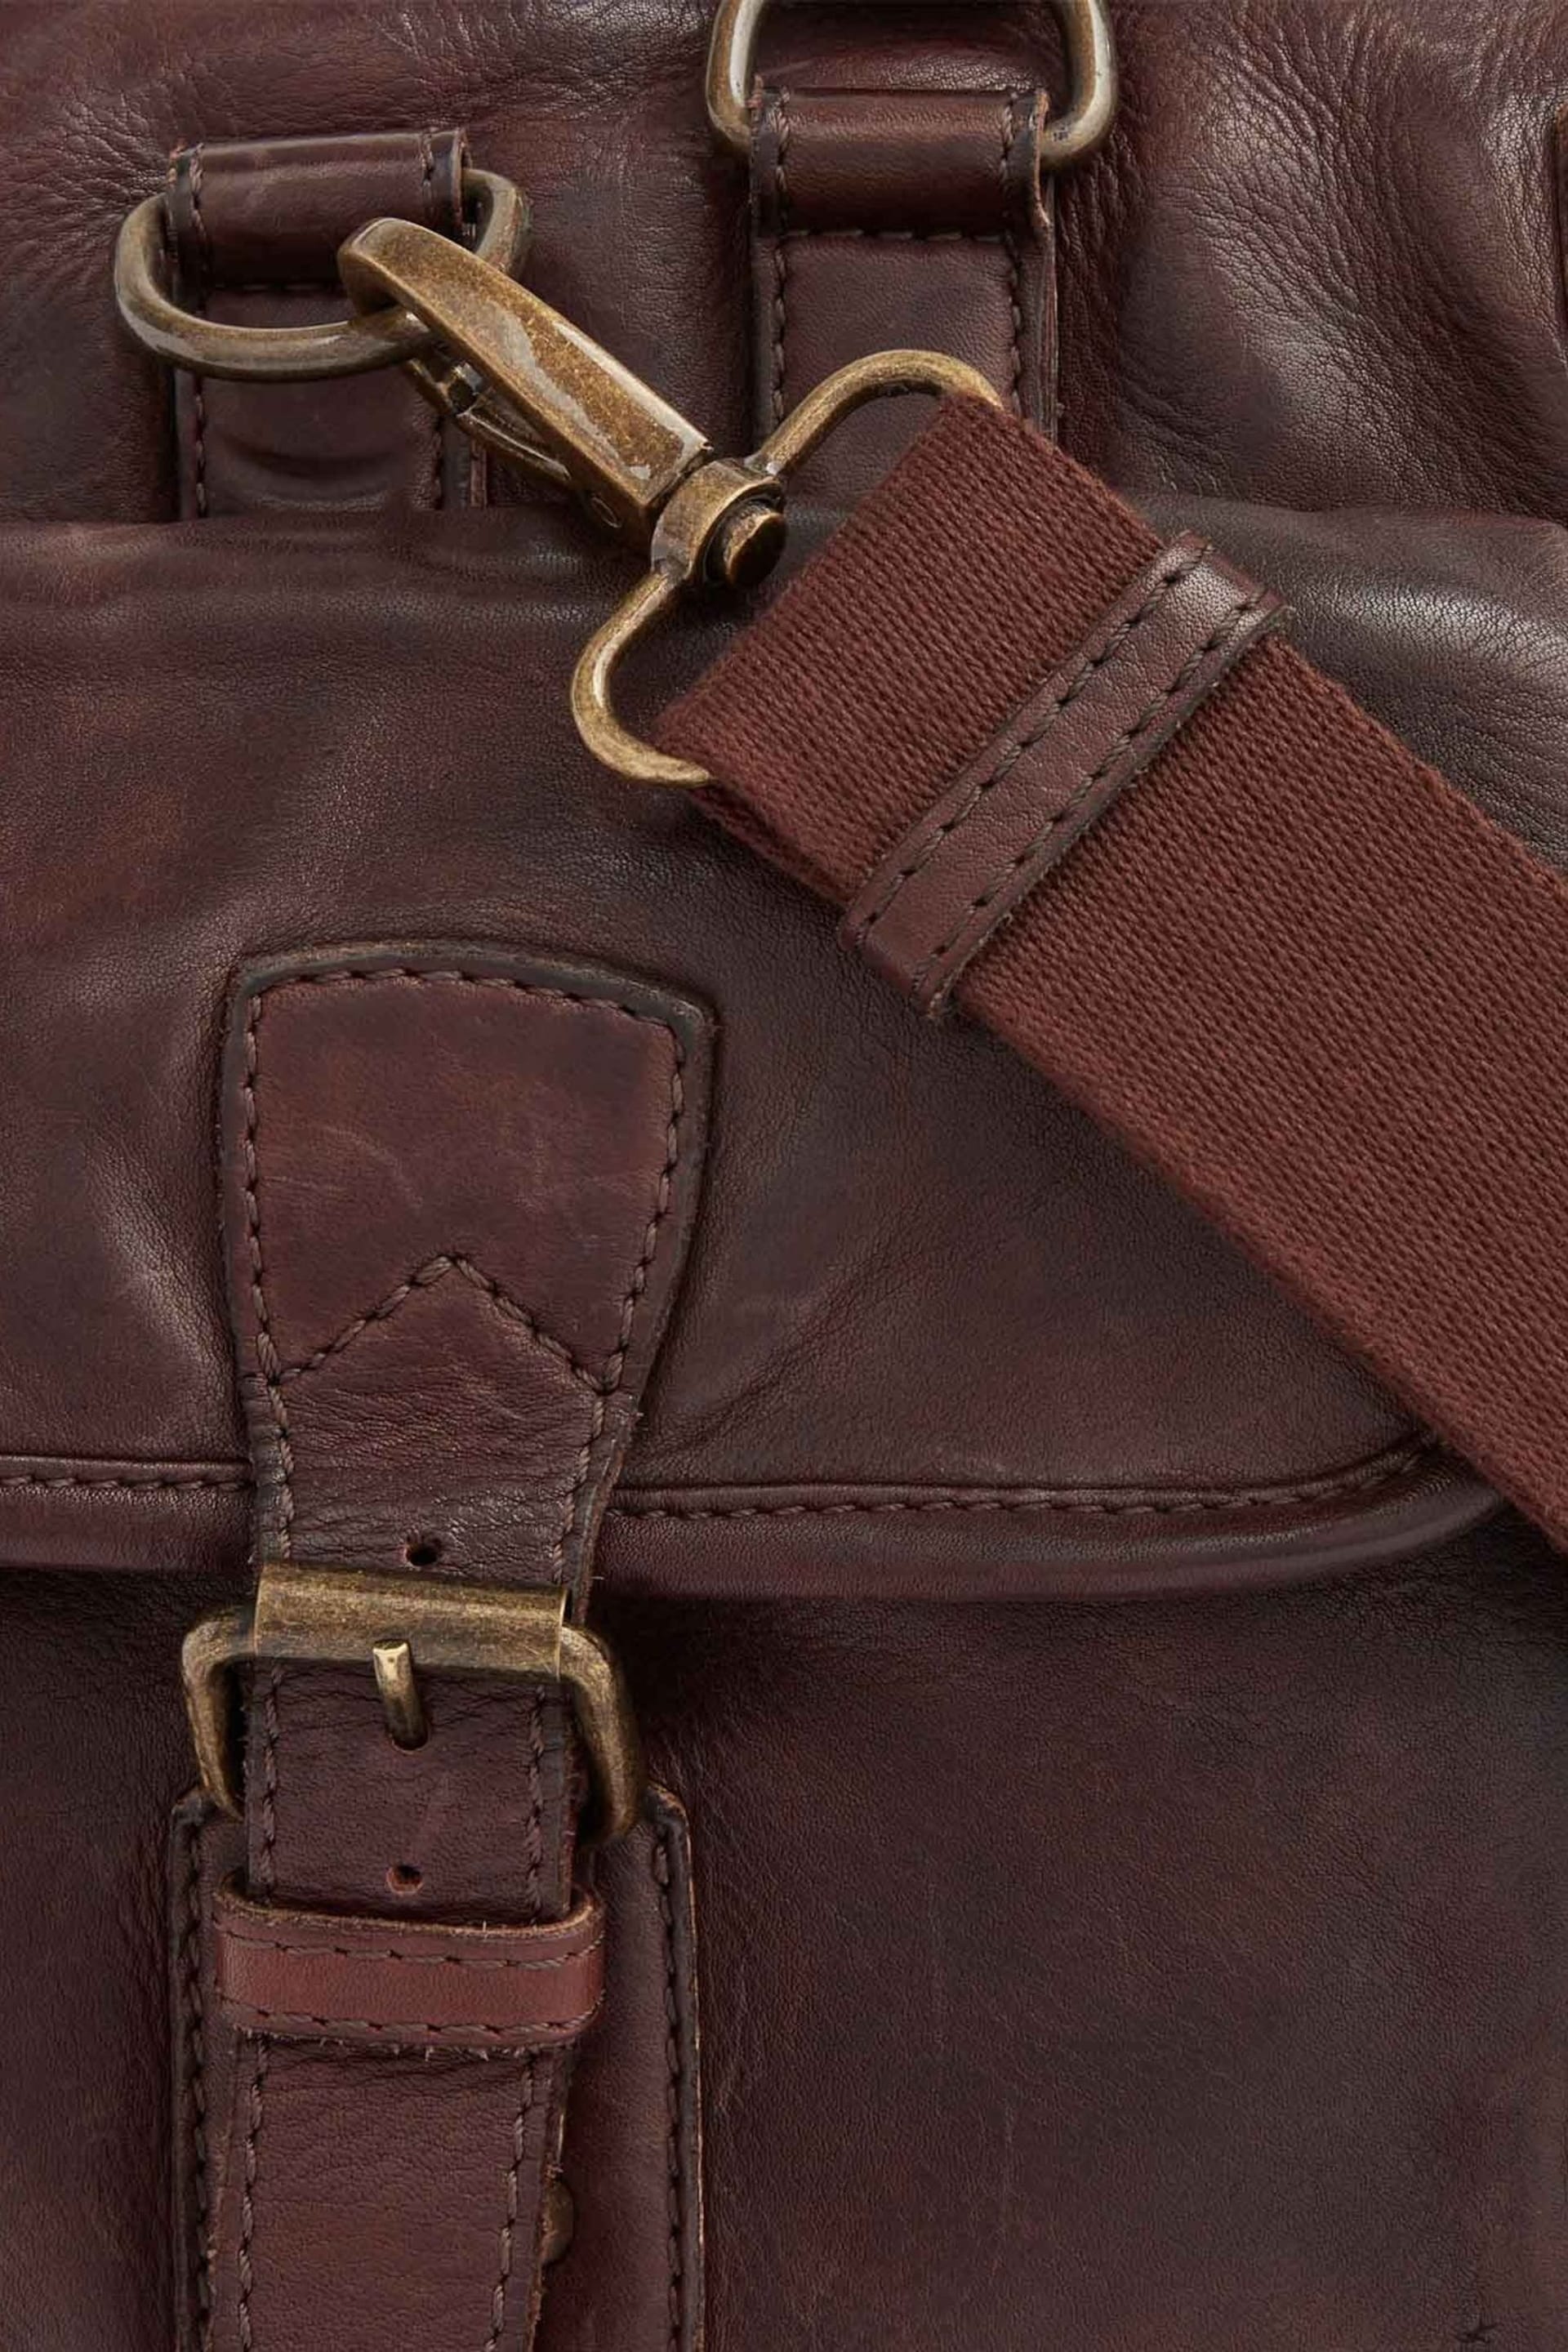 Osprey London Medium The Washed Leather Grip Brown Bag - Image 7 of 7